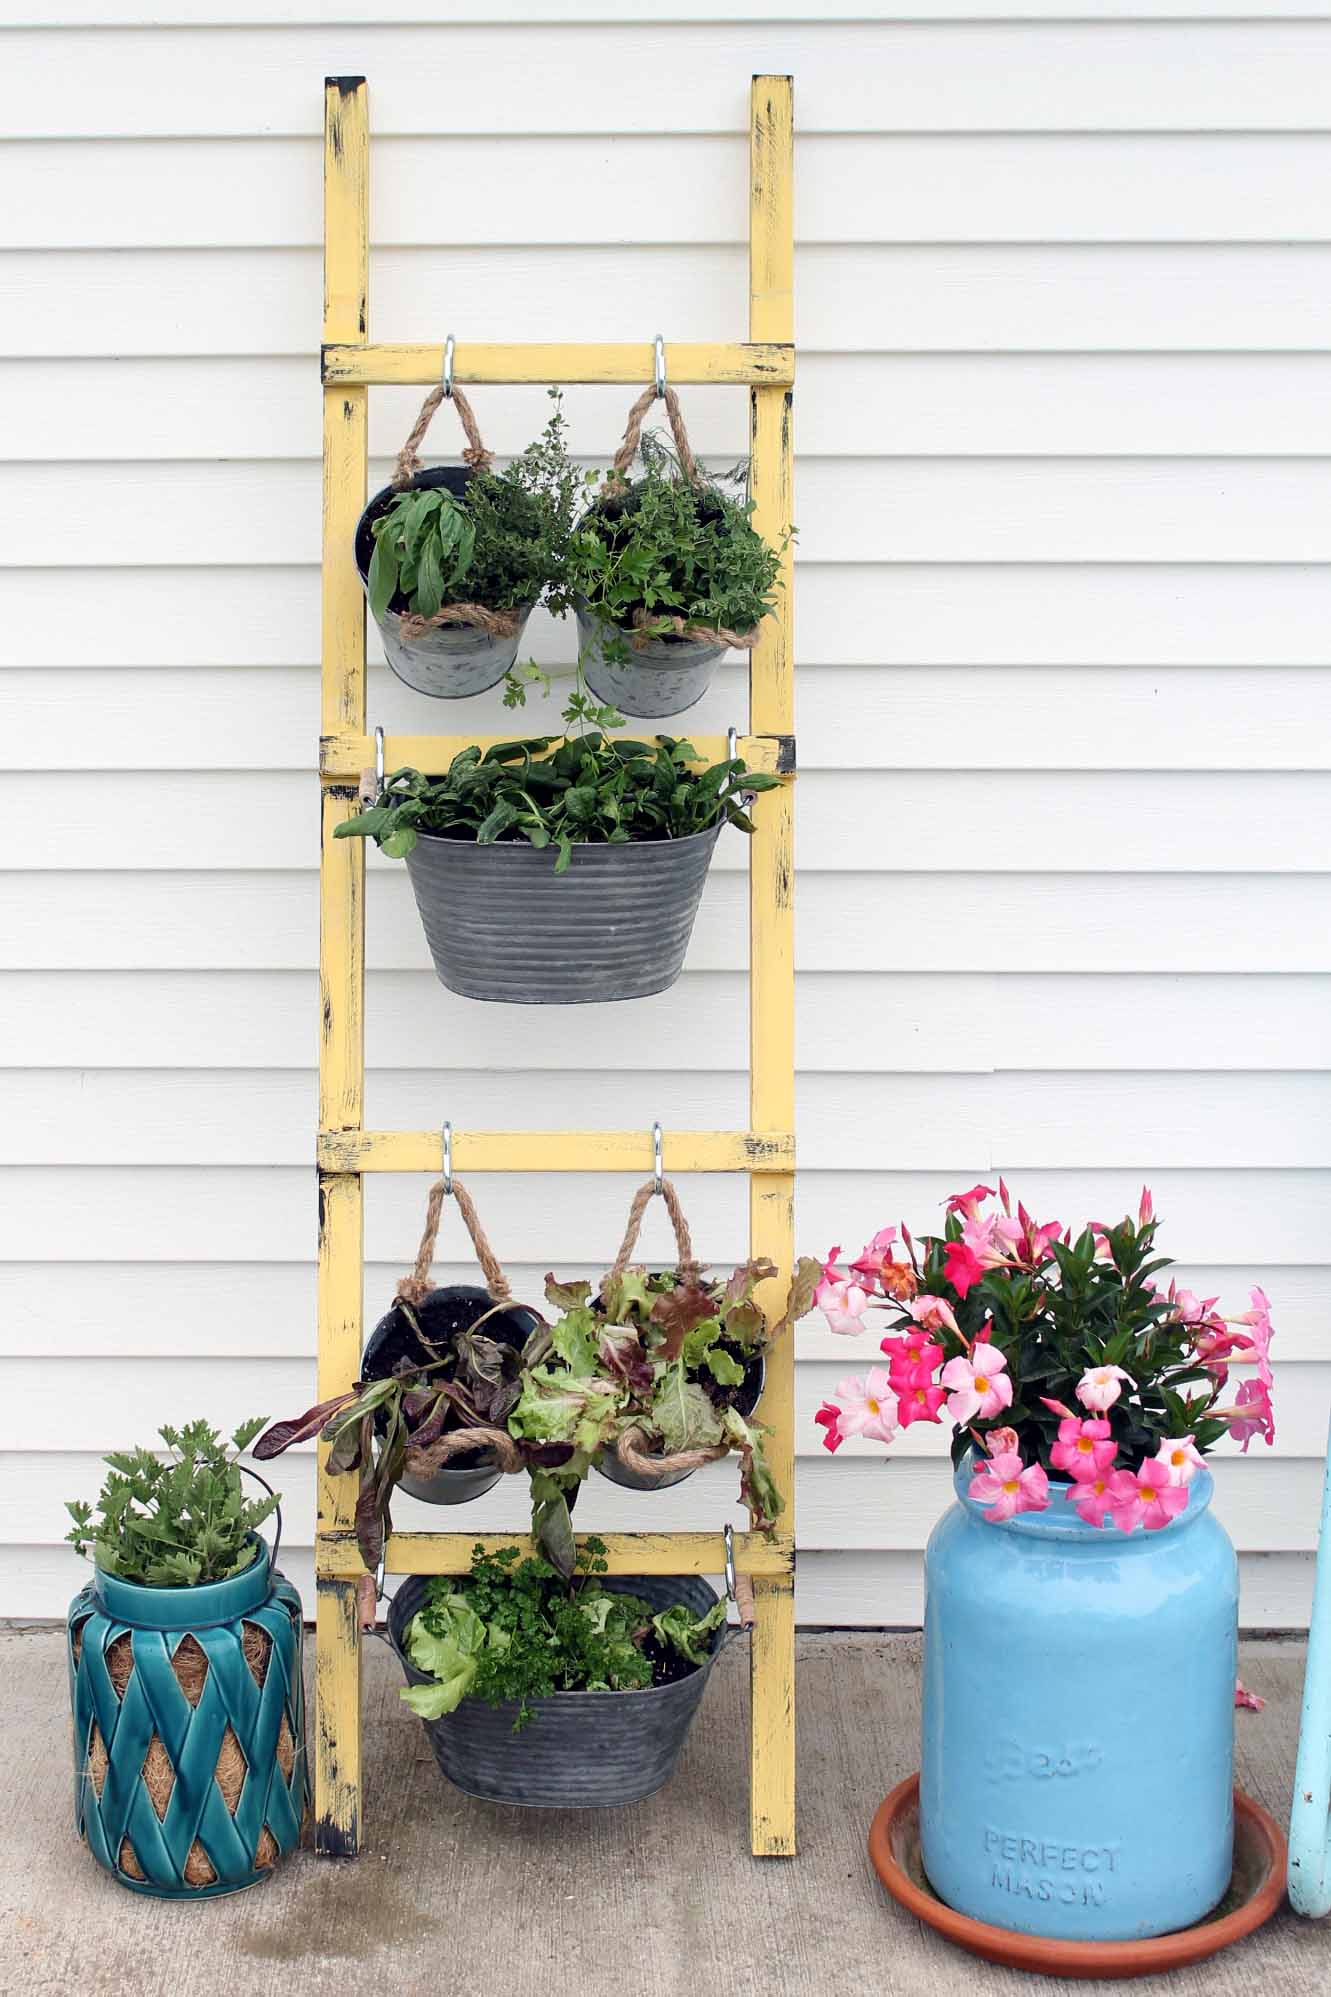 Add this DIY vertical garden to your porch this spring and summer! The perfect way to go vegetables and herbs in a small space!